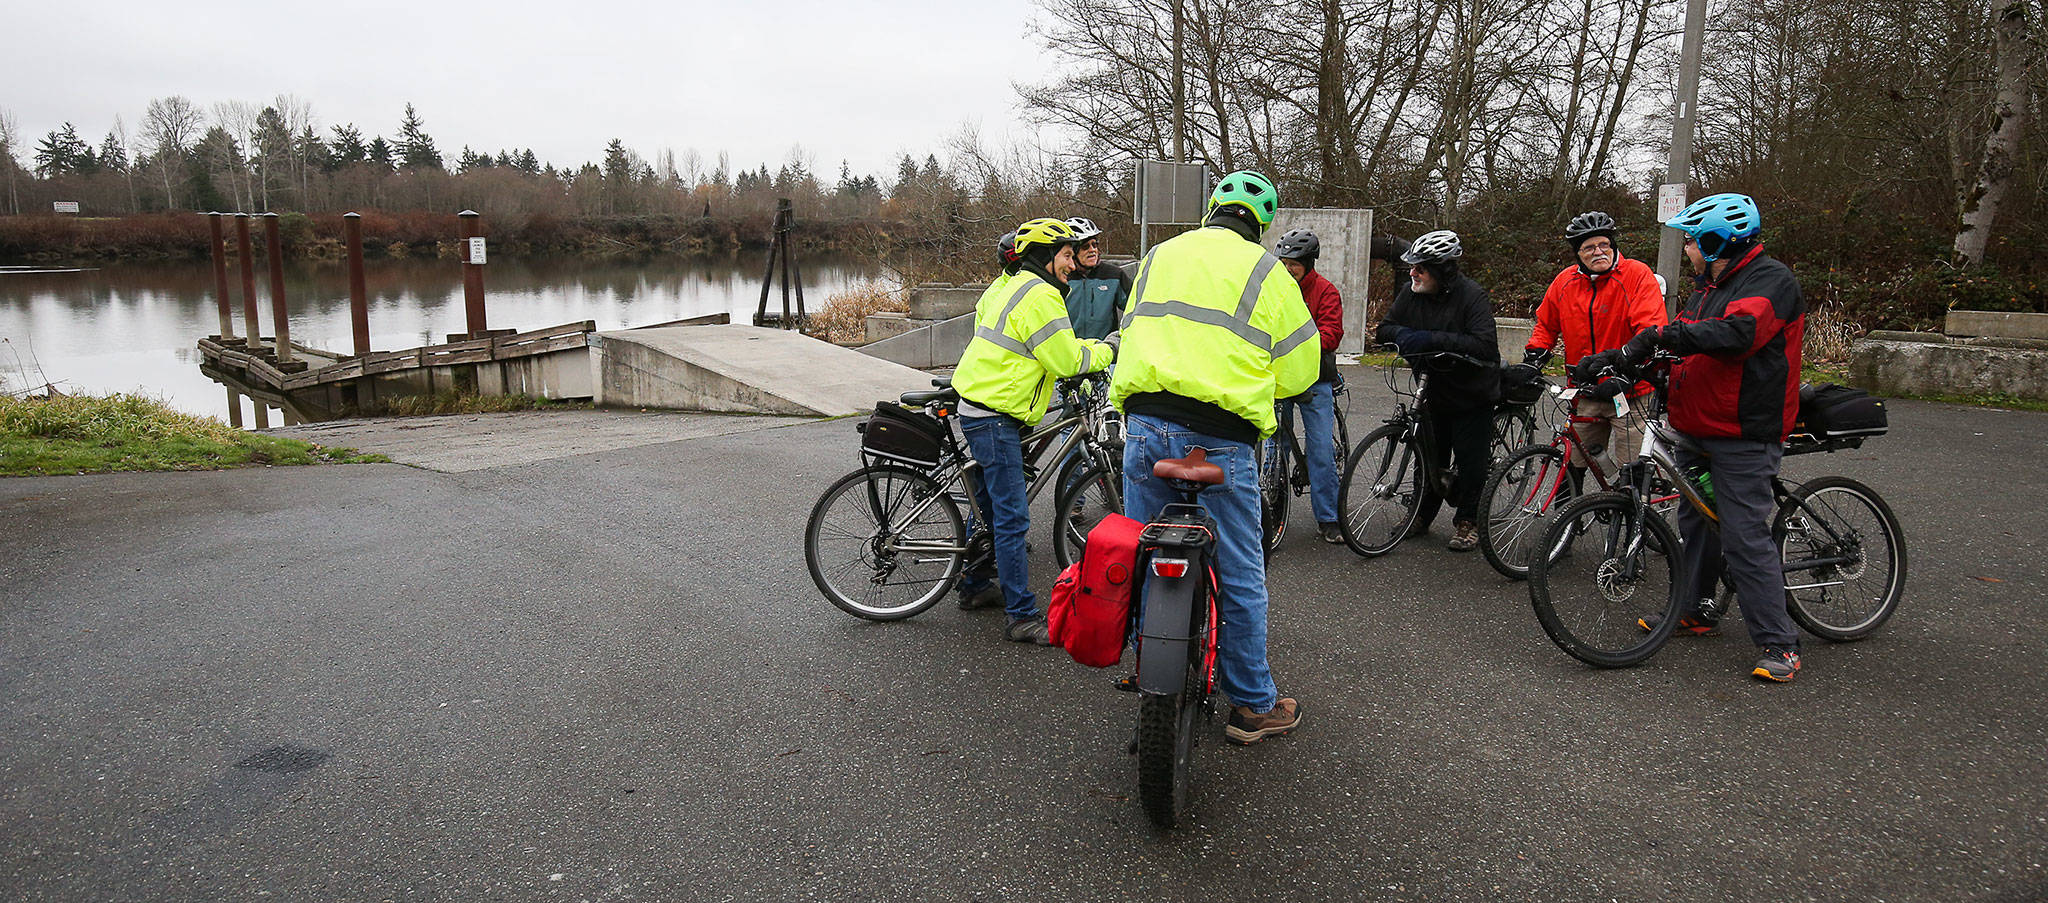 A group of bikers stop for a break by Rotary Park’s boat launch on Monday in Everett. The popular boat launch and park along the Snohomish River is set to get a $400,000 makeover. (Andy Bronson / The Herald)